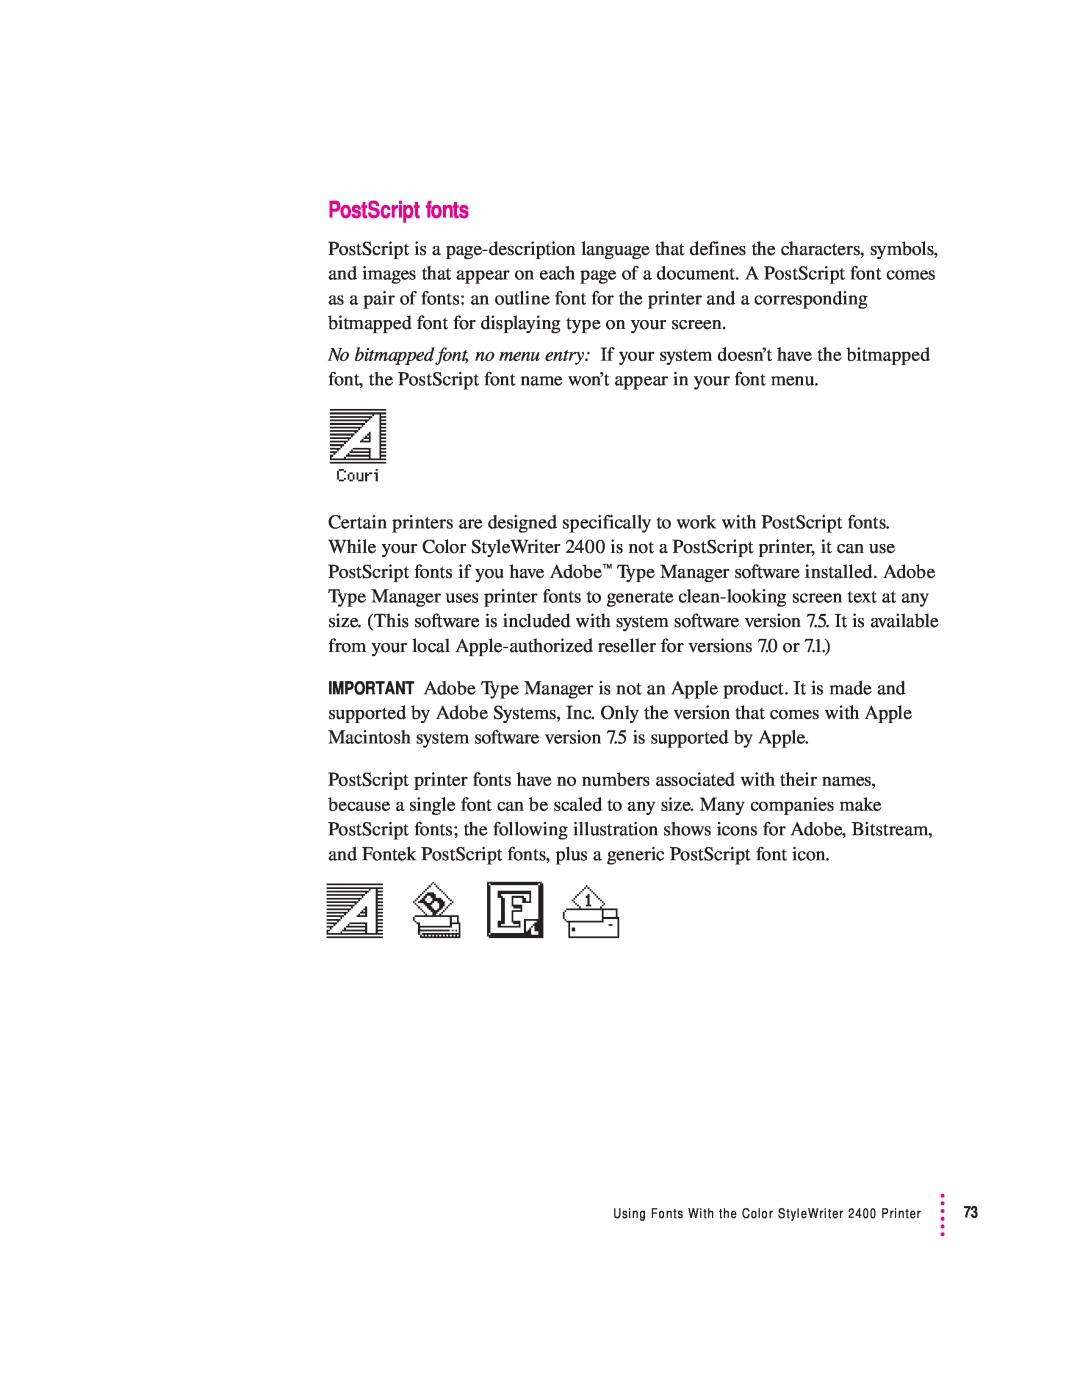 Apple manual PostScript fonts, Using Fonts With the Color StyleWriter 2400 Printer 